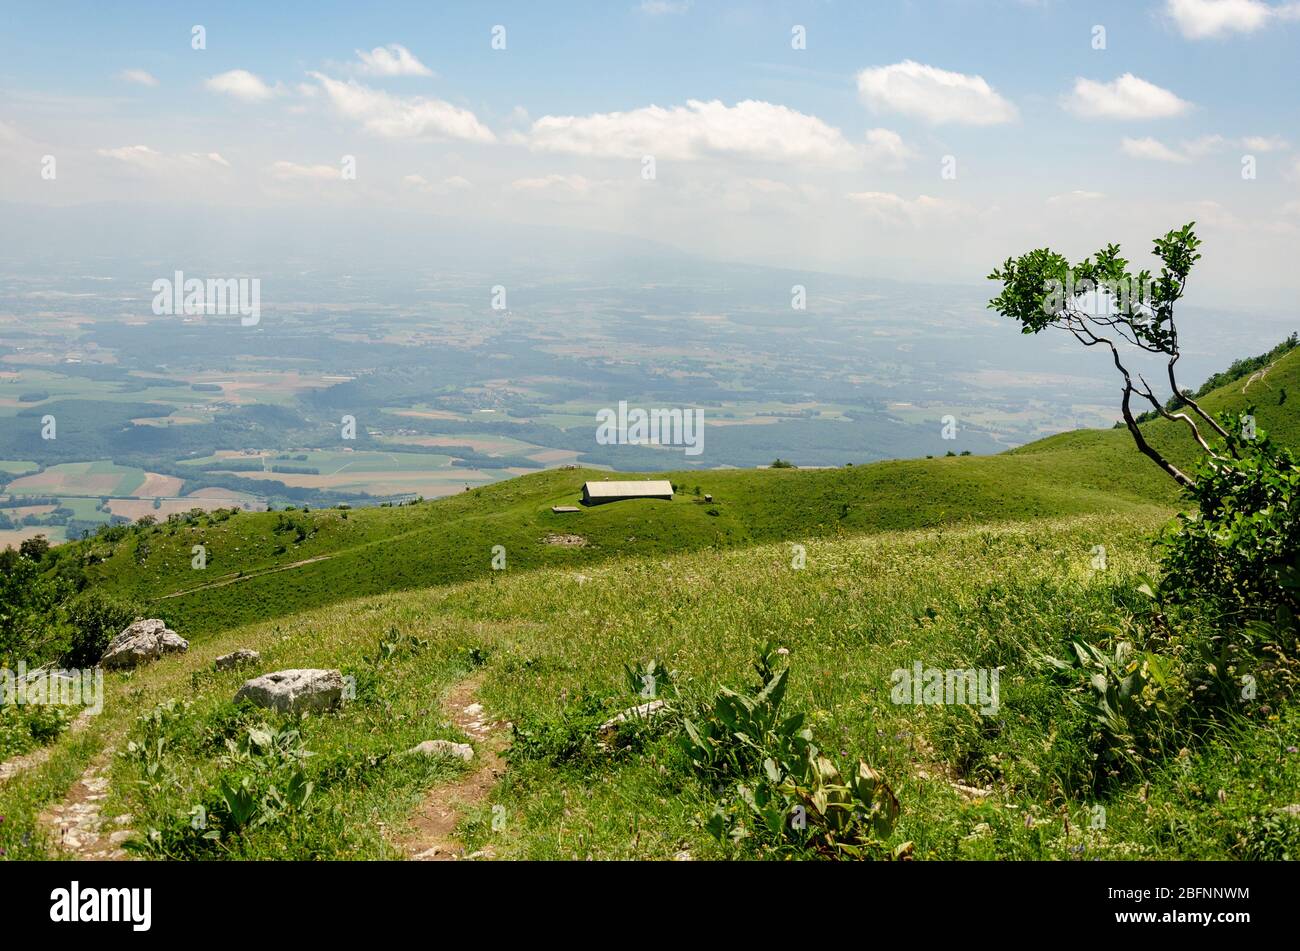 Green mountain landscape overlooking the Thoiry region in France as seen while hiking to Le Reculet on Jura Mountains Stock Photo